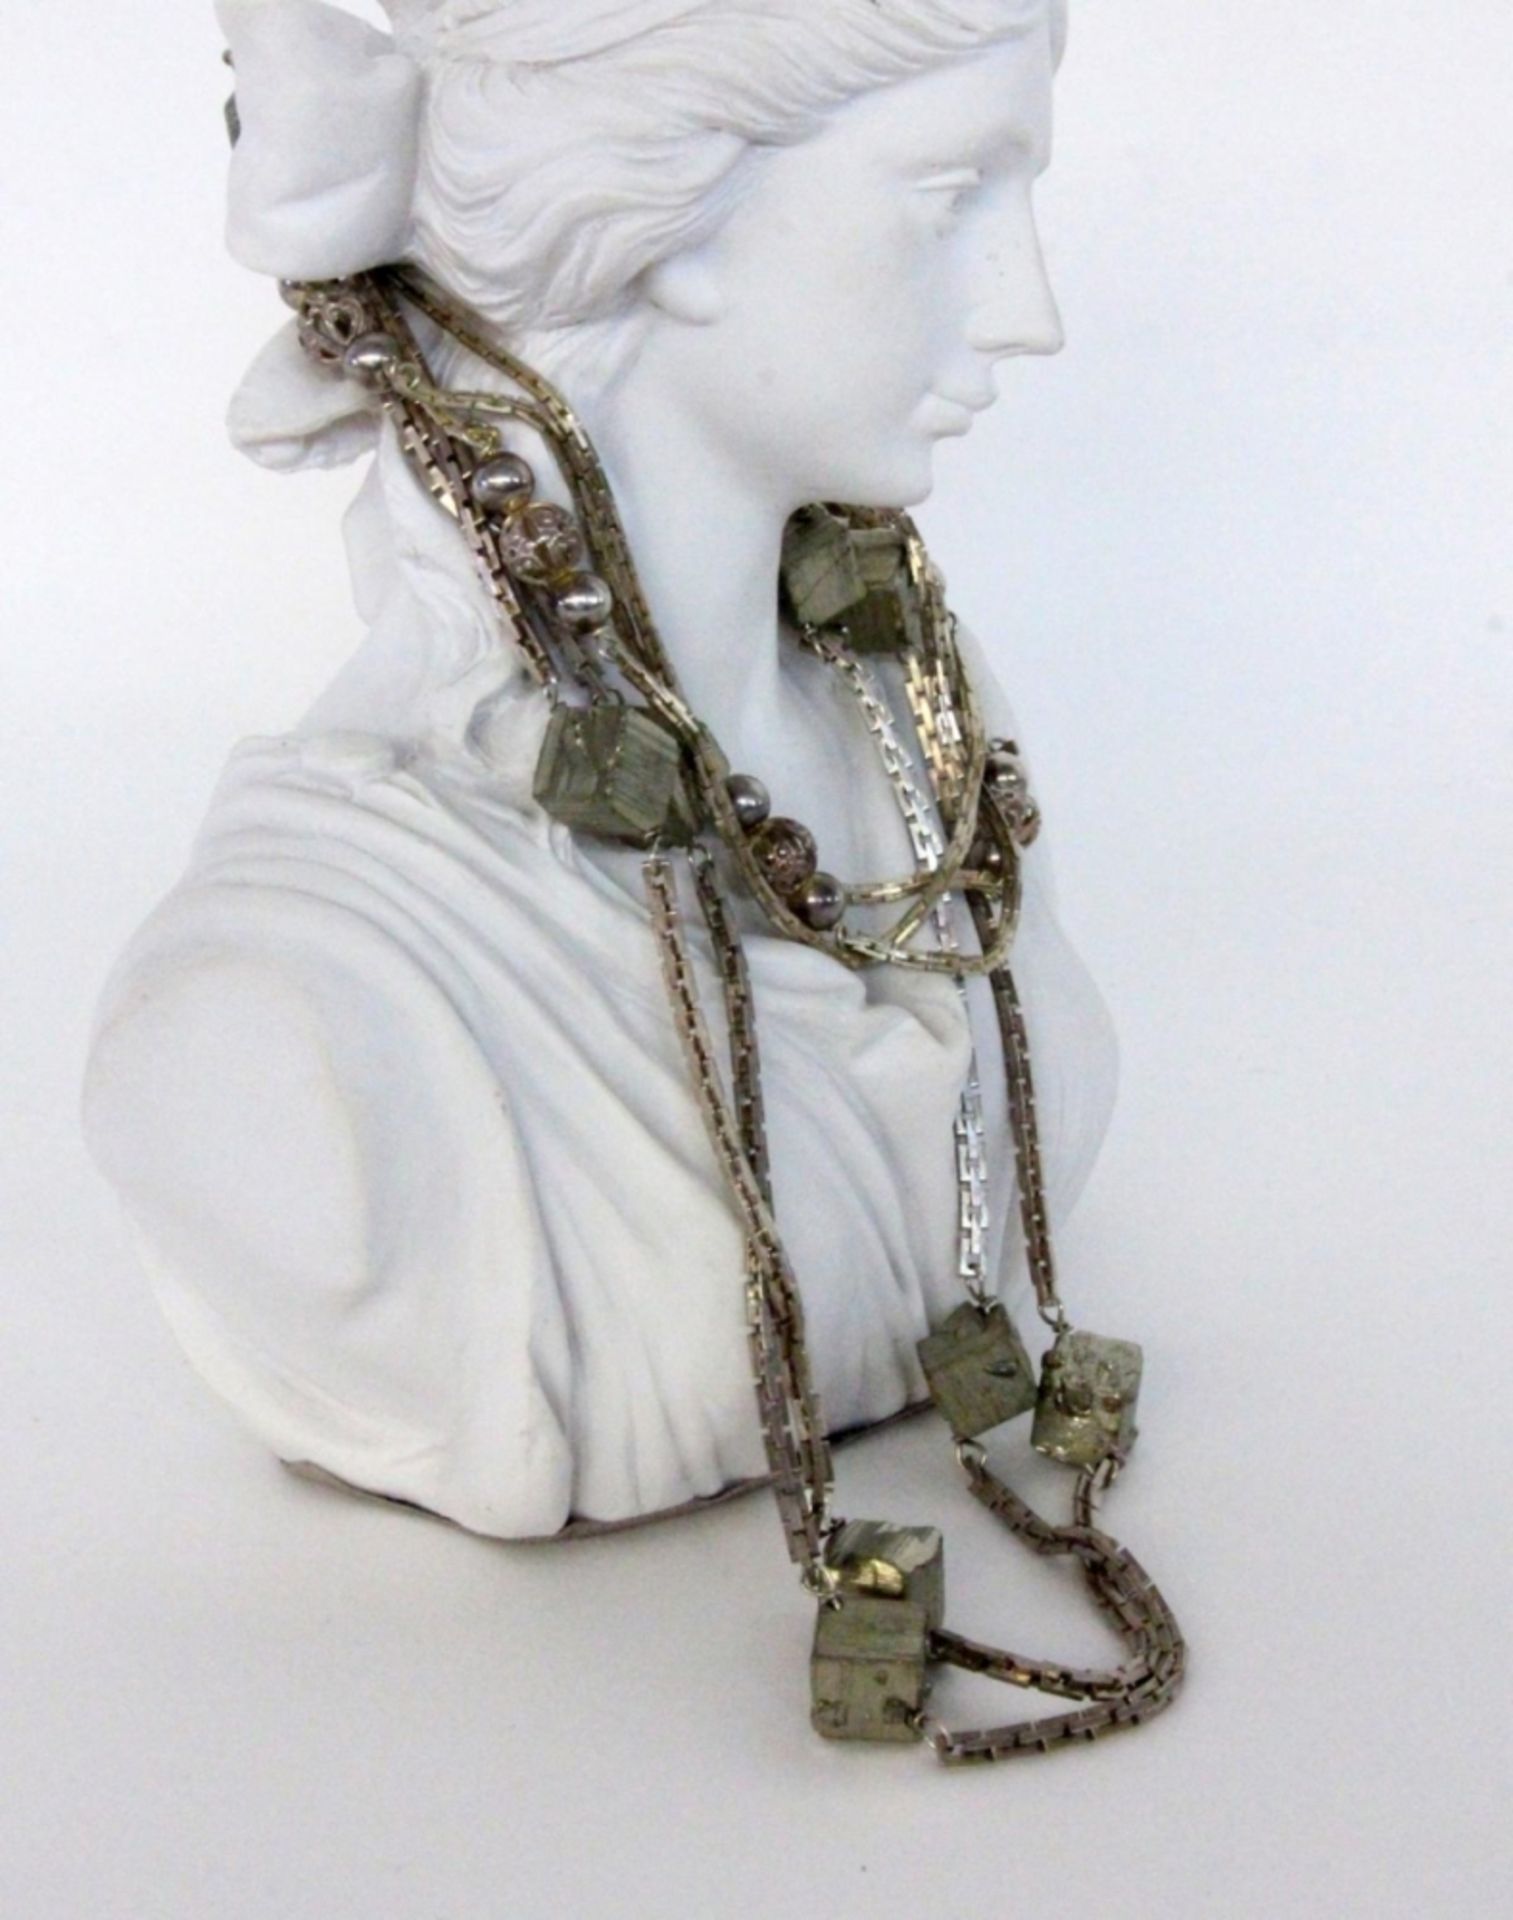 2 SILBERNE HALSKETTEN mit Pyrit. L. je ca. 86cm 2 SILVER NECKLACES with pyrite. Each approximately